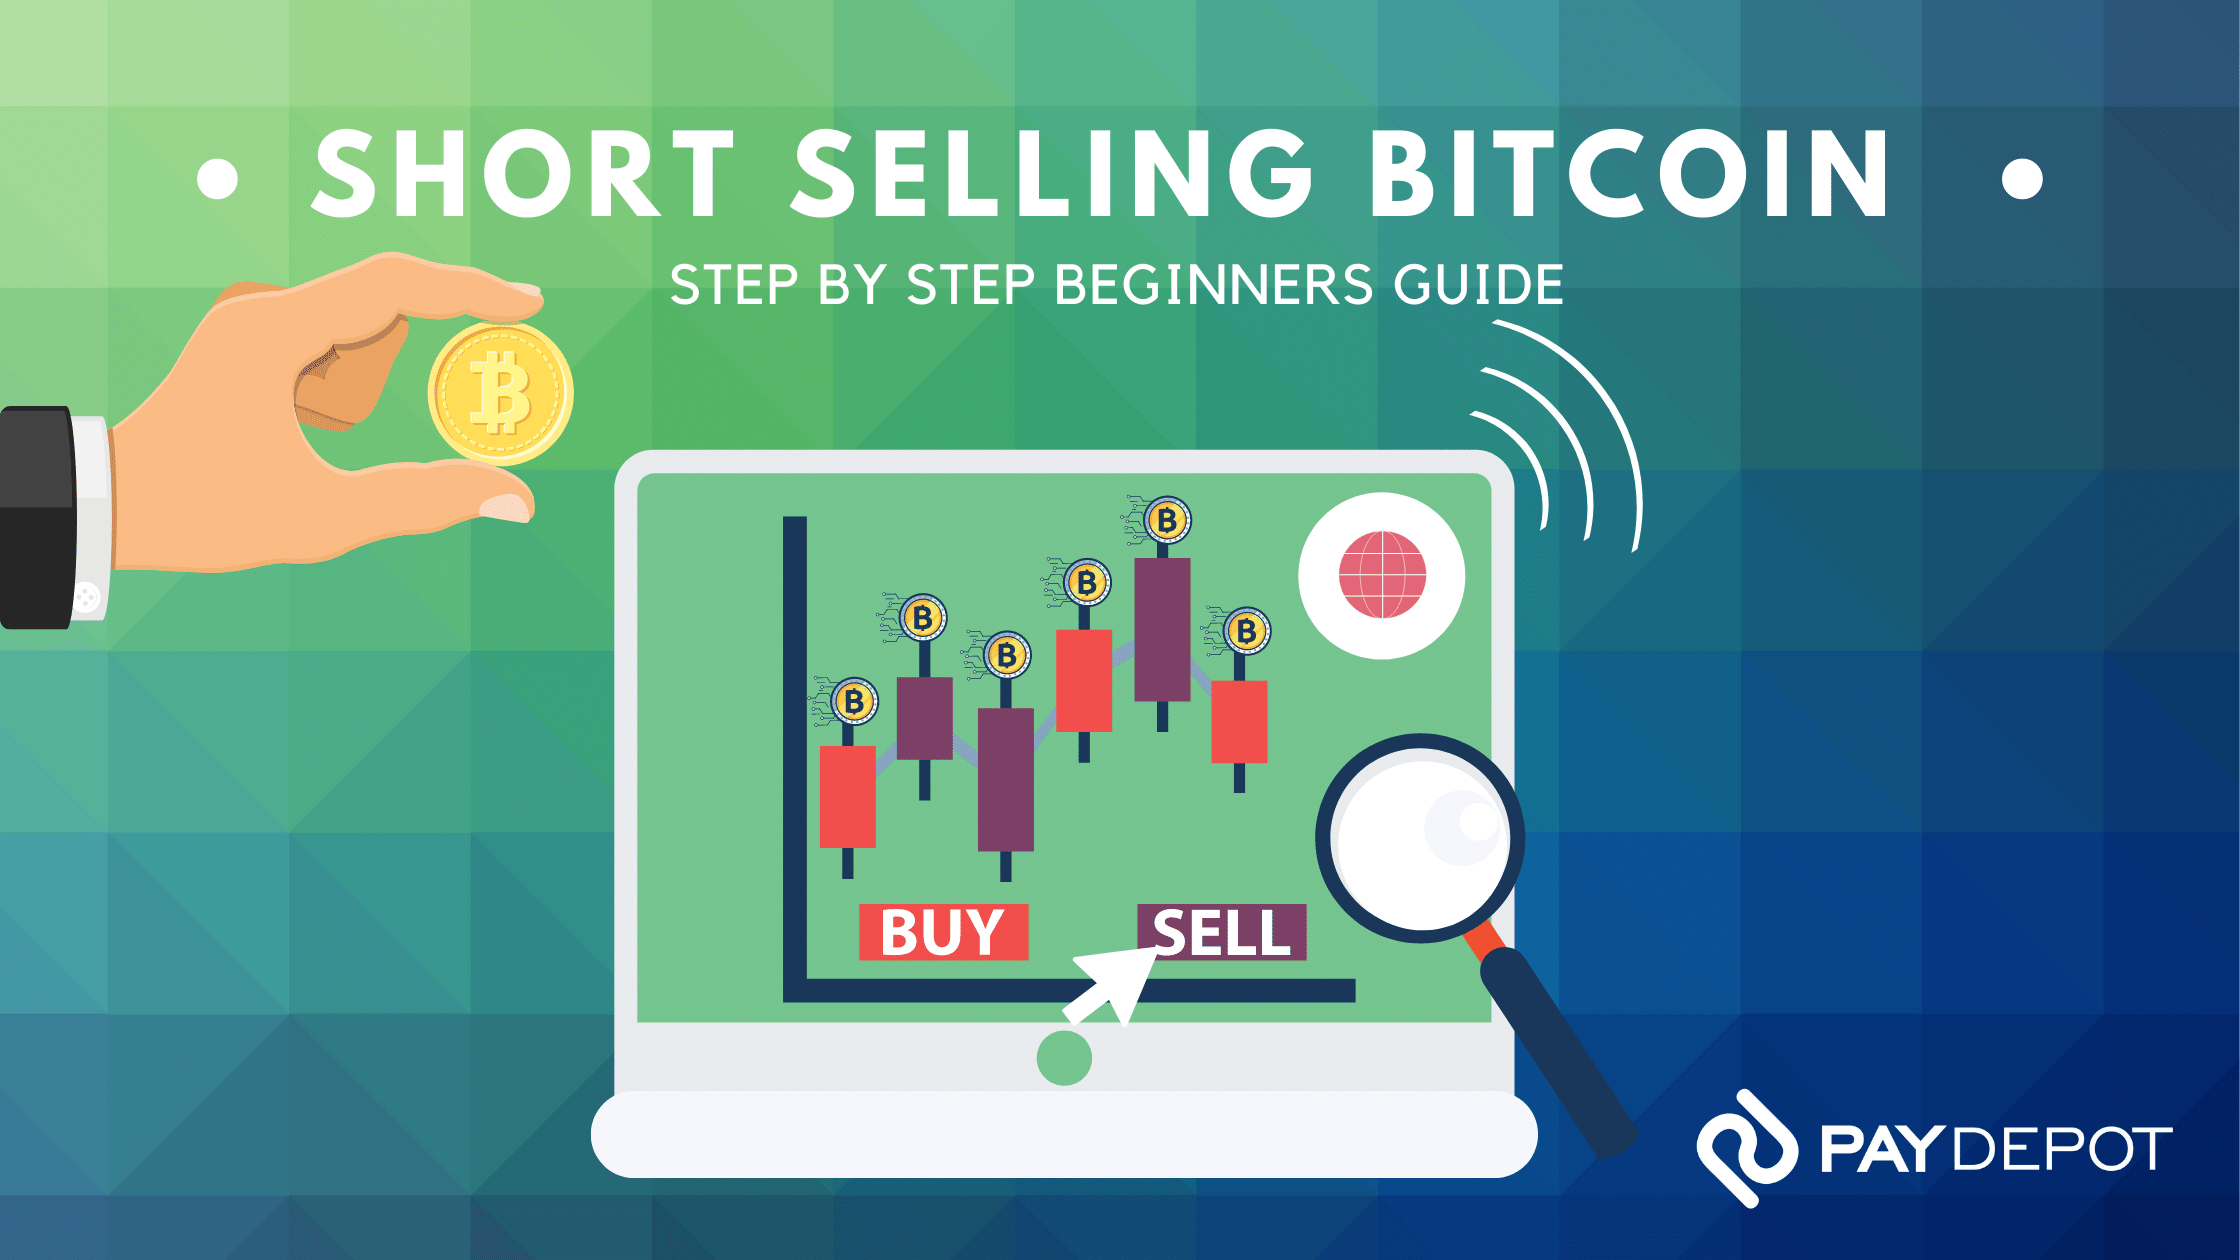 Short Selling Bitcoin - a Step by Step Beginners Guide